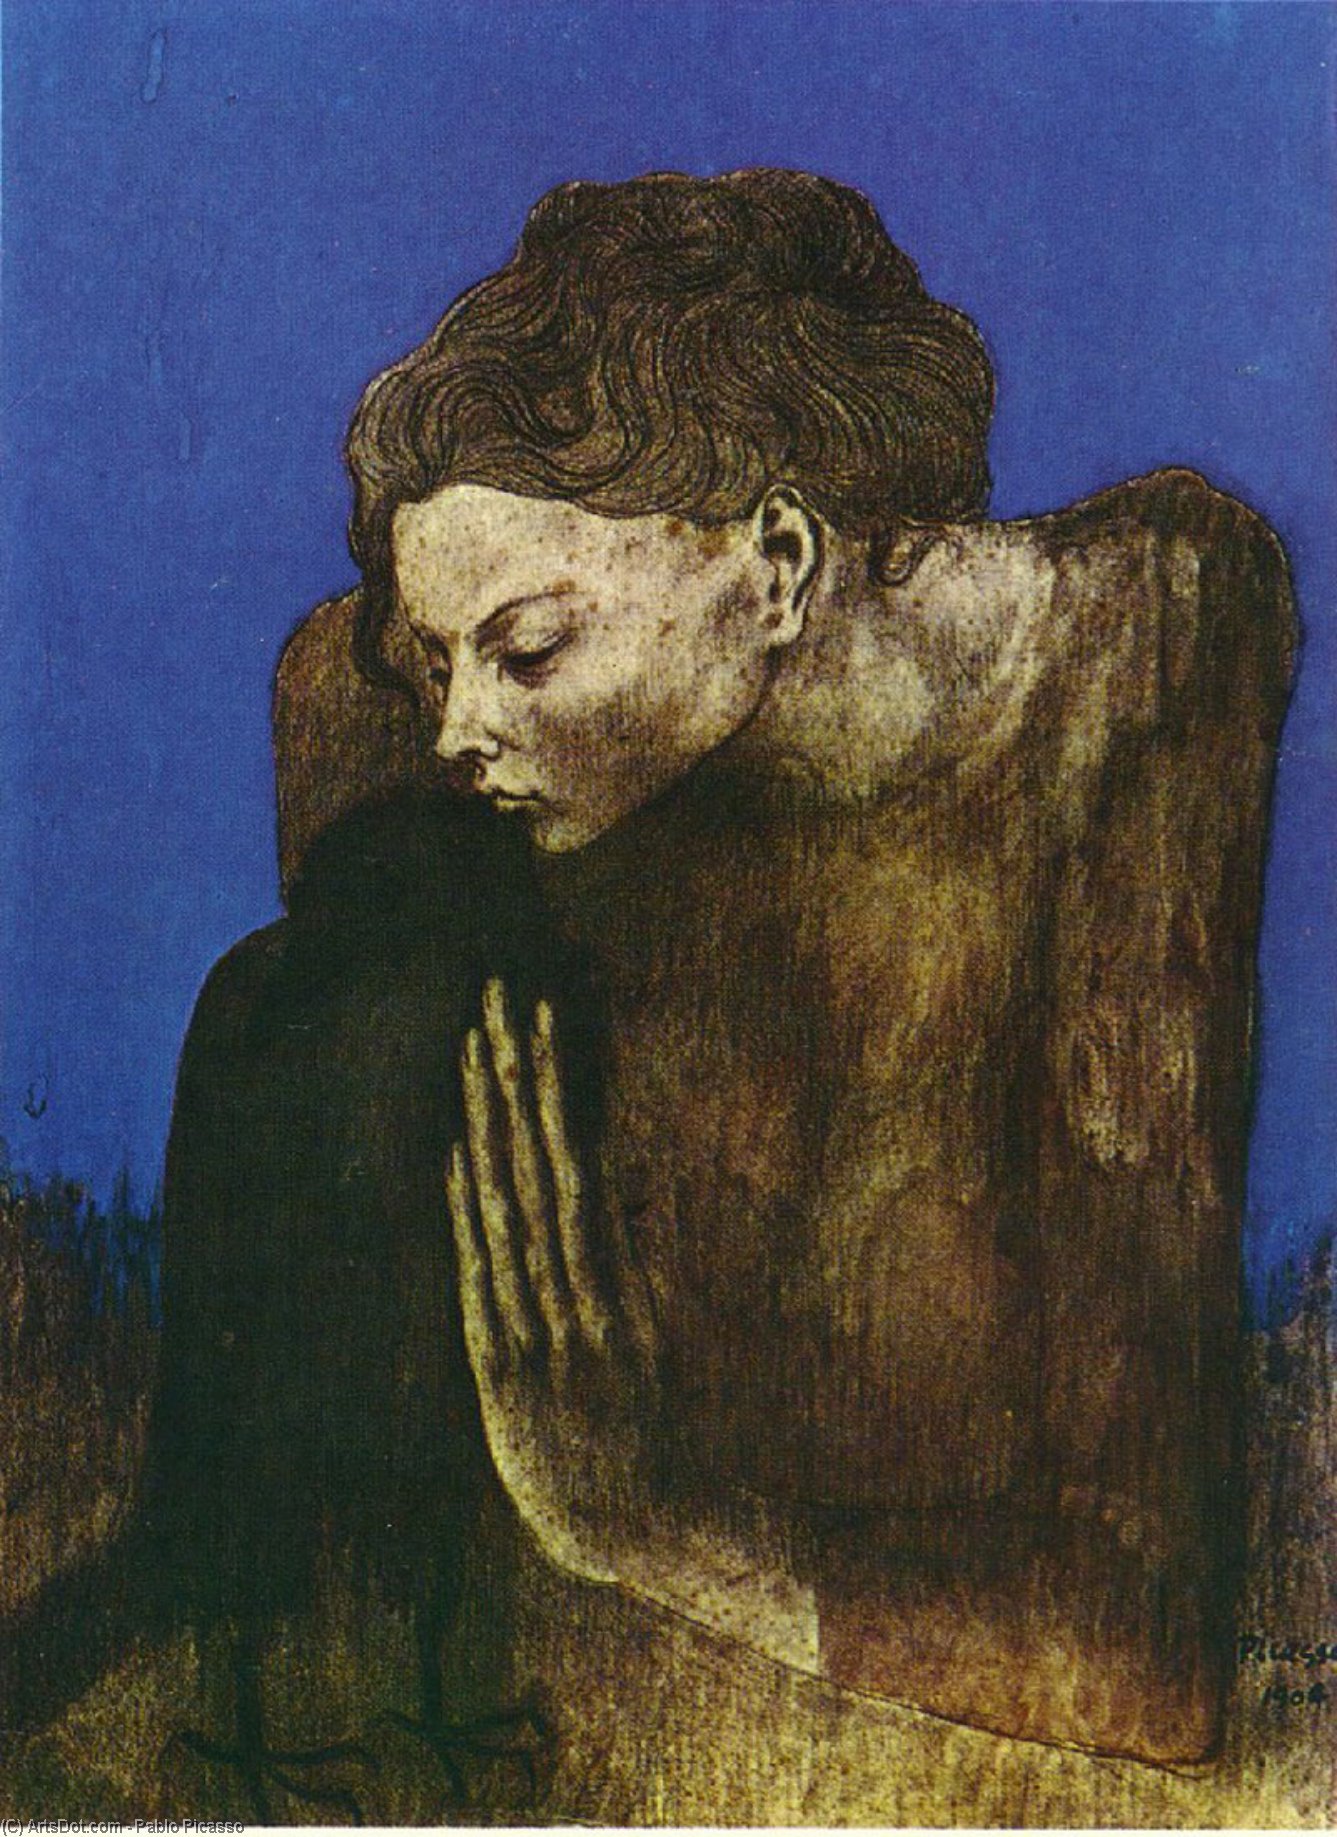 WikiOO.org - 백과 사전 - 회화, 삽화 Pablo Picasso - Woman with raven